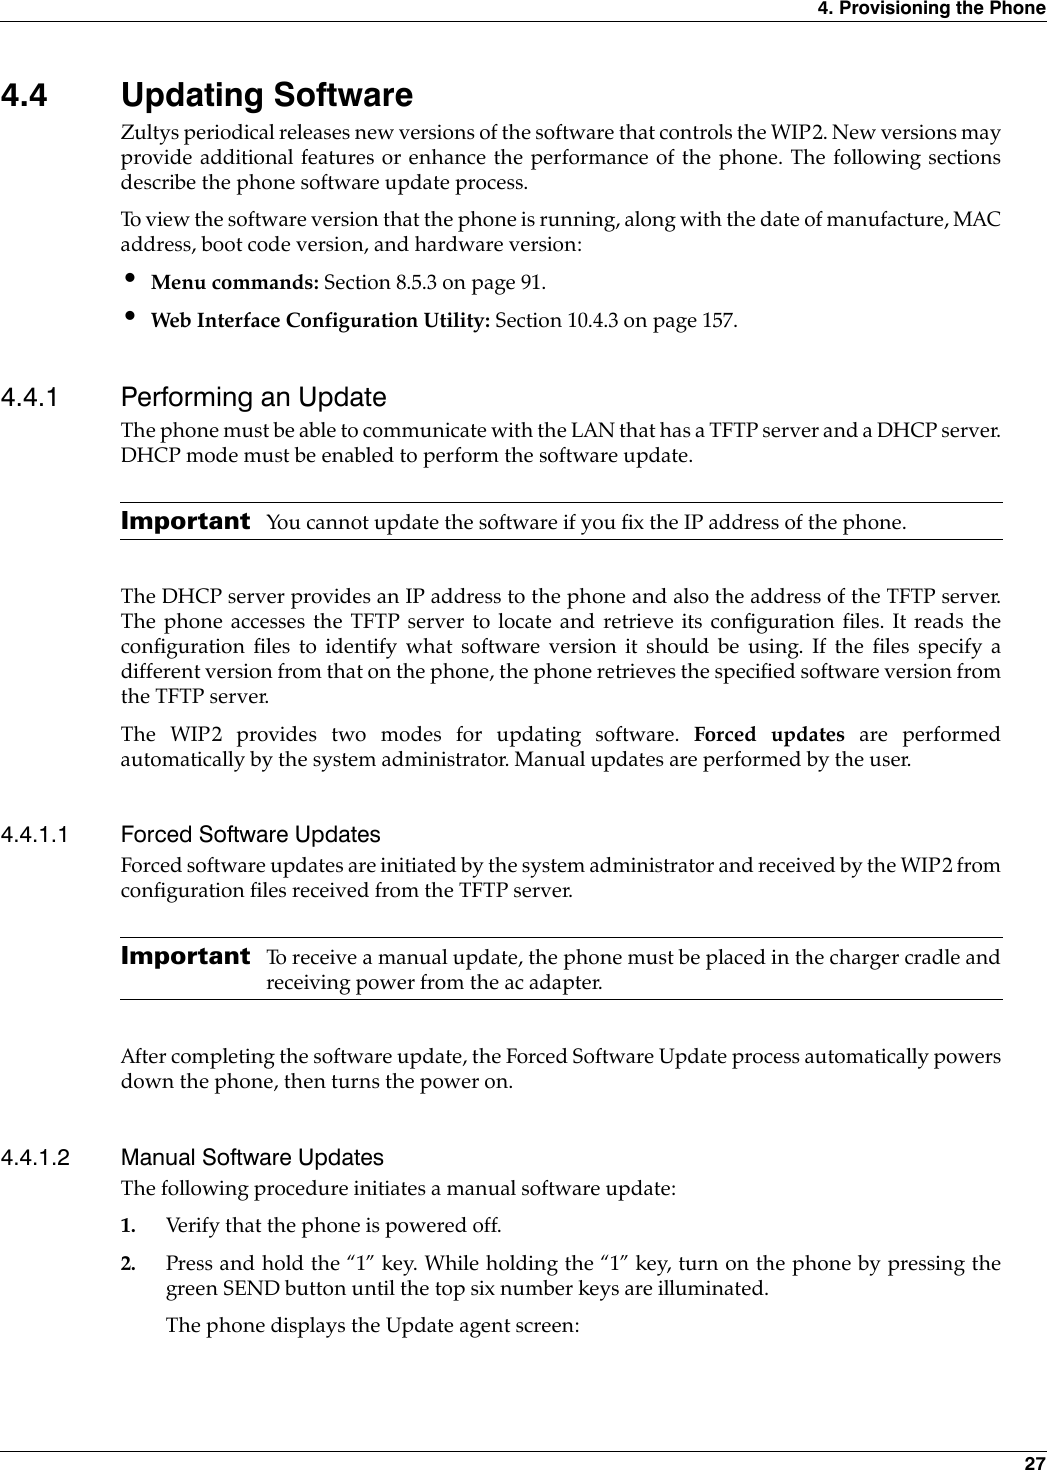 4. Provisioning the Phone 274.4 Updating SoftwareZultys periodical releases new versions of the software that controls the WIP2. New versions mayprovide additional features or enhance the performance of the phone. The following sectionsdescribe the phone software update process.To view the software version that the phone is running, along with the date of manufacture, MACaddress, boot code version, and hardware version:•Menu commands: Section 8.5.3 on page 91.•Web Interface Configuration Utility: Section 10.4.3 on page 157.4.4.1 Performing an UpdateThe phone must be able to communicate with the LAN that has a TFTP server and a DHCP server.DHCP mode must be enabled to perform the software update.Important You cannot update the software if you fix the IP address of the phone.The DHCP server provides an IP address to the phone and also the address of the TFTP server.The phone accesses the TFTP server to locate and retrieve its configuration files. It reads theconfiguration files to identify what software version it should be using. If the files specify adifferent version from that on the phone, the phone retrieves the specified software version fromthe TFTP server.The WIP2 provides two modes for updating software. Forced updates are performedautomatically by the system administrator. Manual updates are performed by the user.4.4.1.1 Forced Software UpdatesForced software updates are initiated by the system administrator and received by the WIP2 fromconfiguration files received from the TFTP server. Important To receive a manual update, the phone must be placed in the charger cradle andreceiving power from the ac adapter.After completing the software update, the Forced Software Update process automatically powersdown the phone, then turns the power on.4.4.1.2 Manual Software UpdatesThe following procedure initiates a manual software update:1. Verify that the phone is powered off.2. Press and hold the “1” key. While holding the “1” key, turn on the phone by pressing thegreen SEND button until the top six number keys are illuminated.The phone displays the Update agent screen: